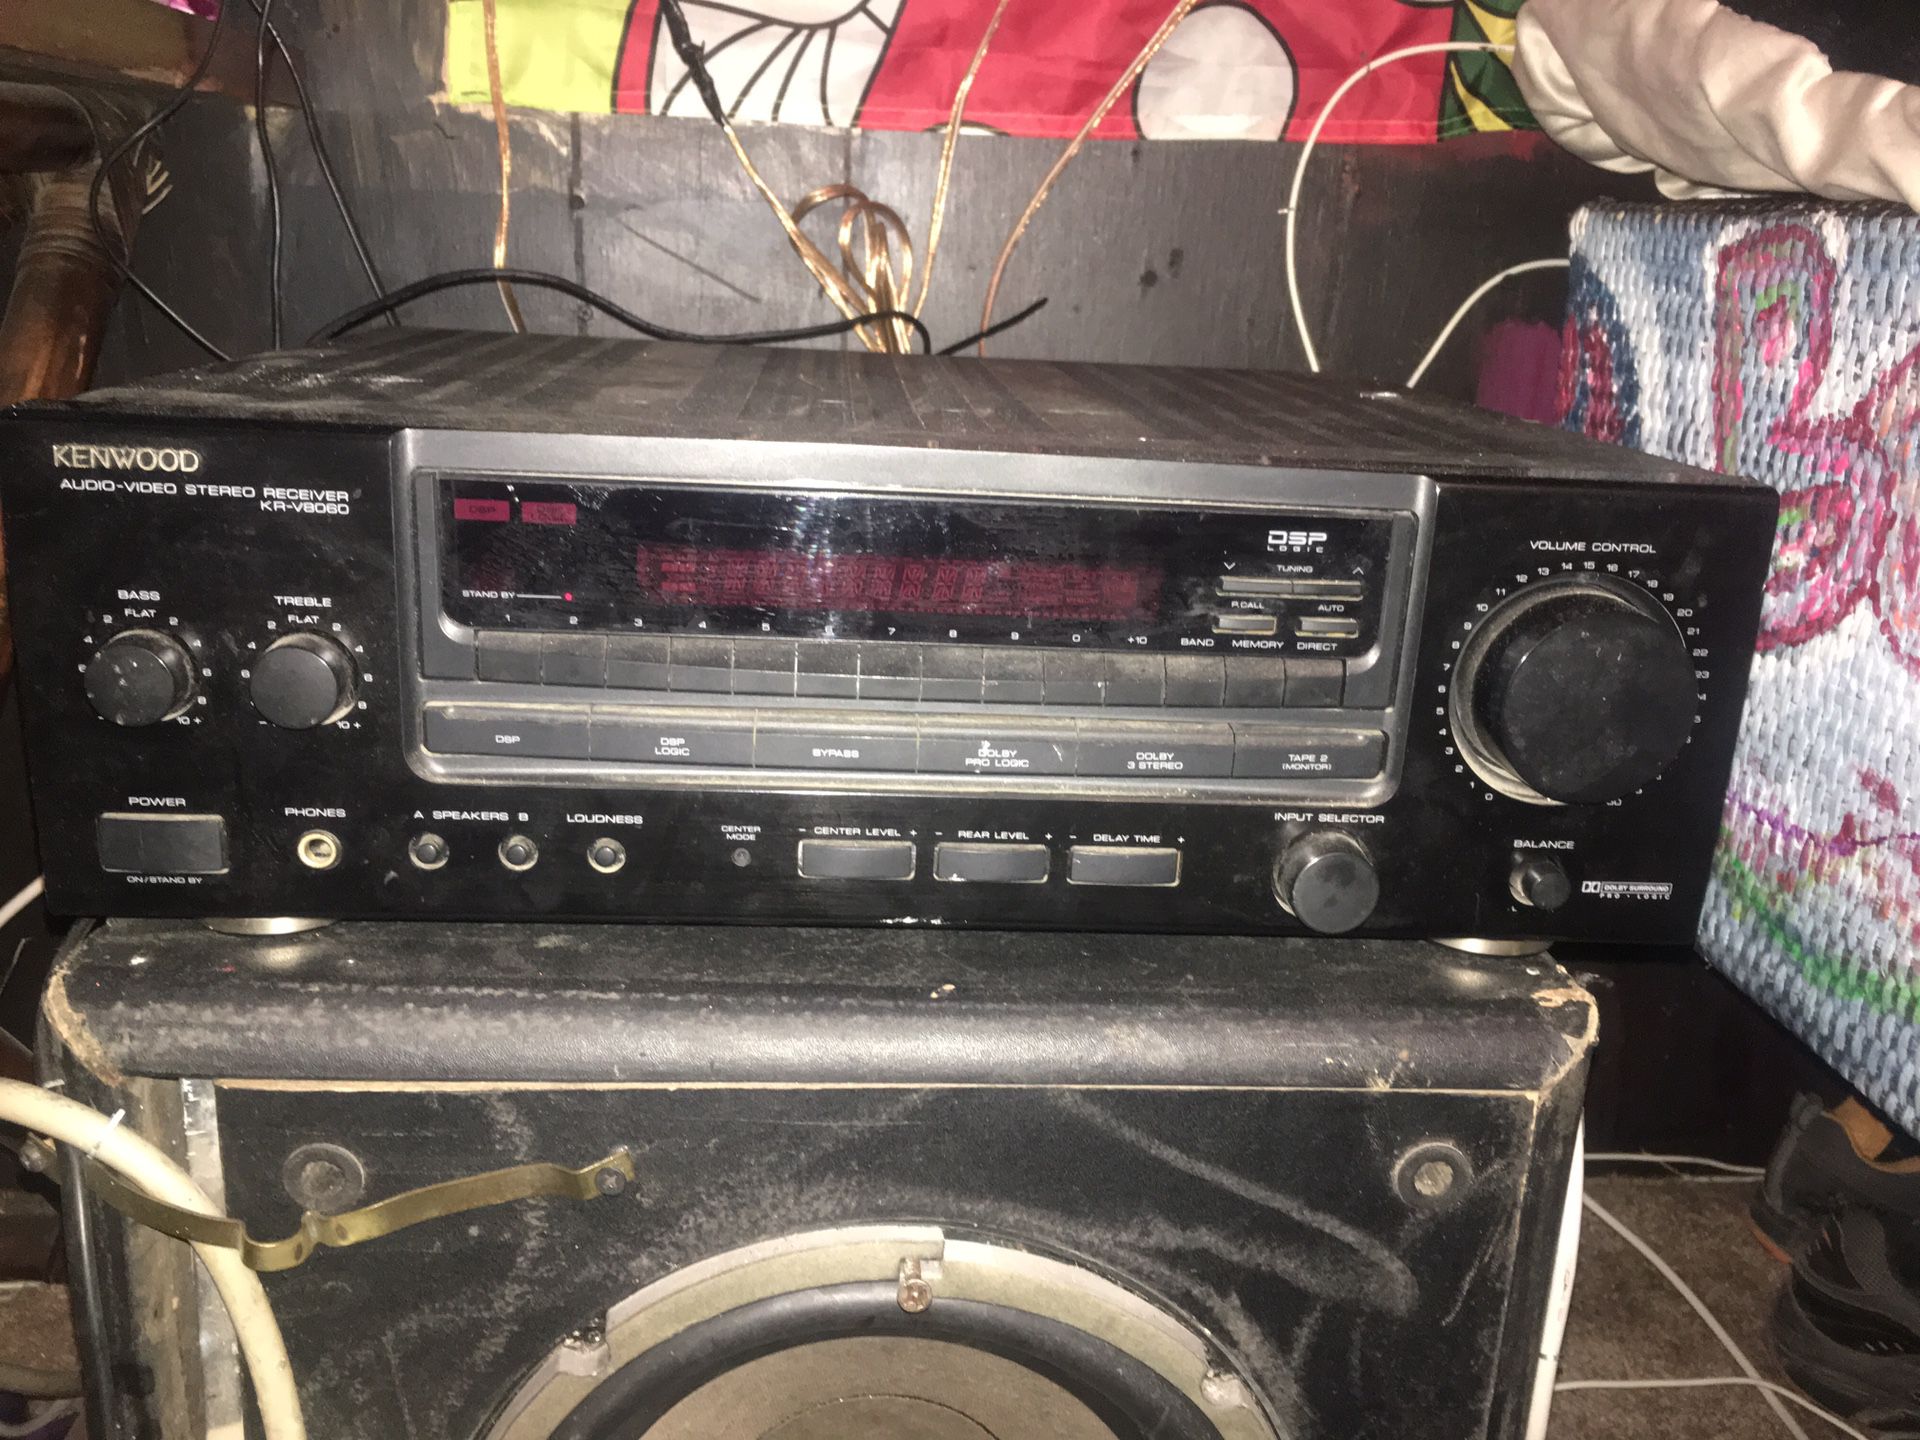 Kenwood home stereo system